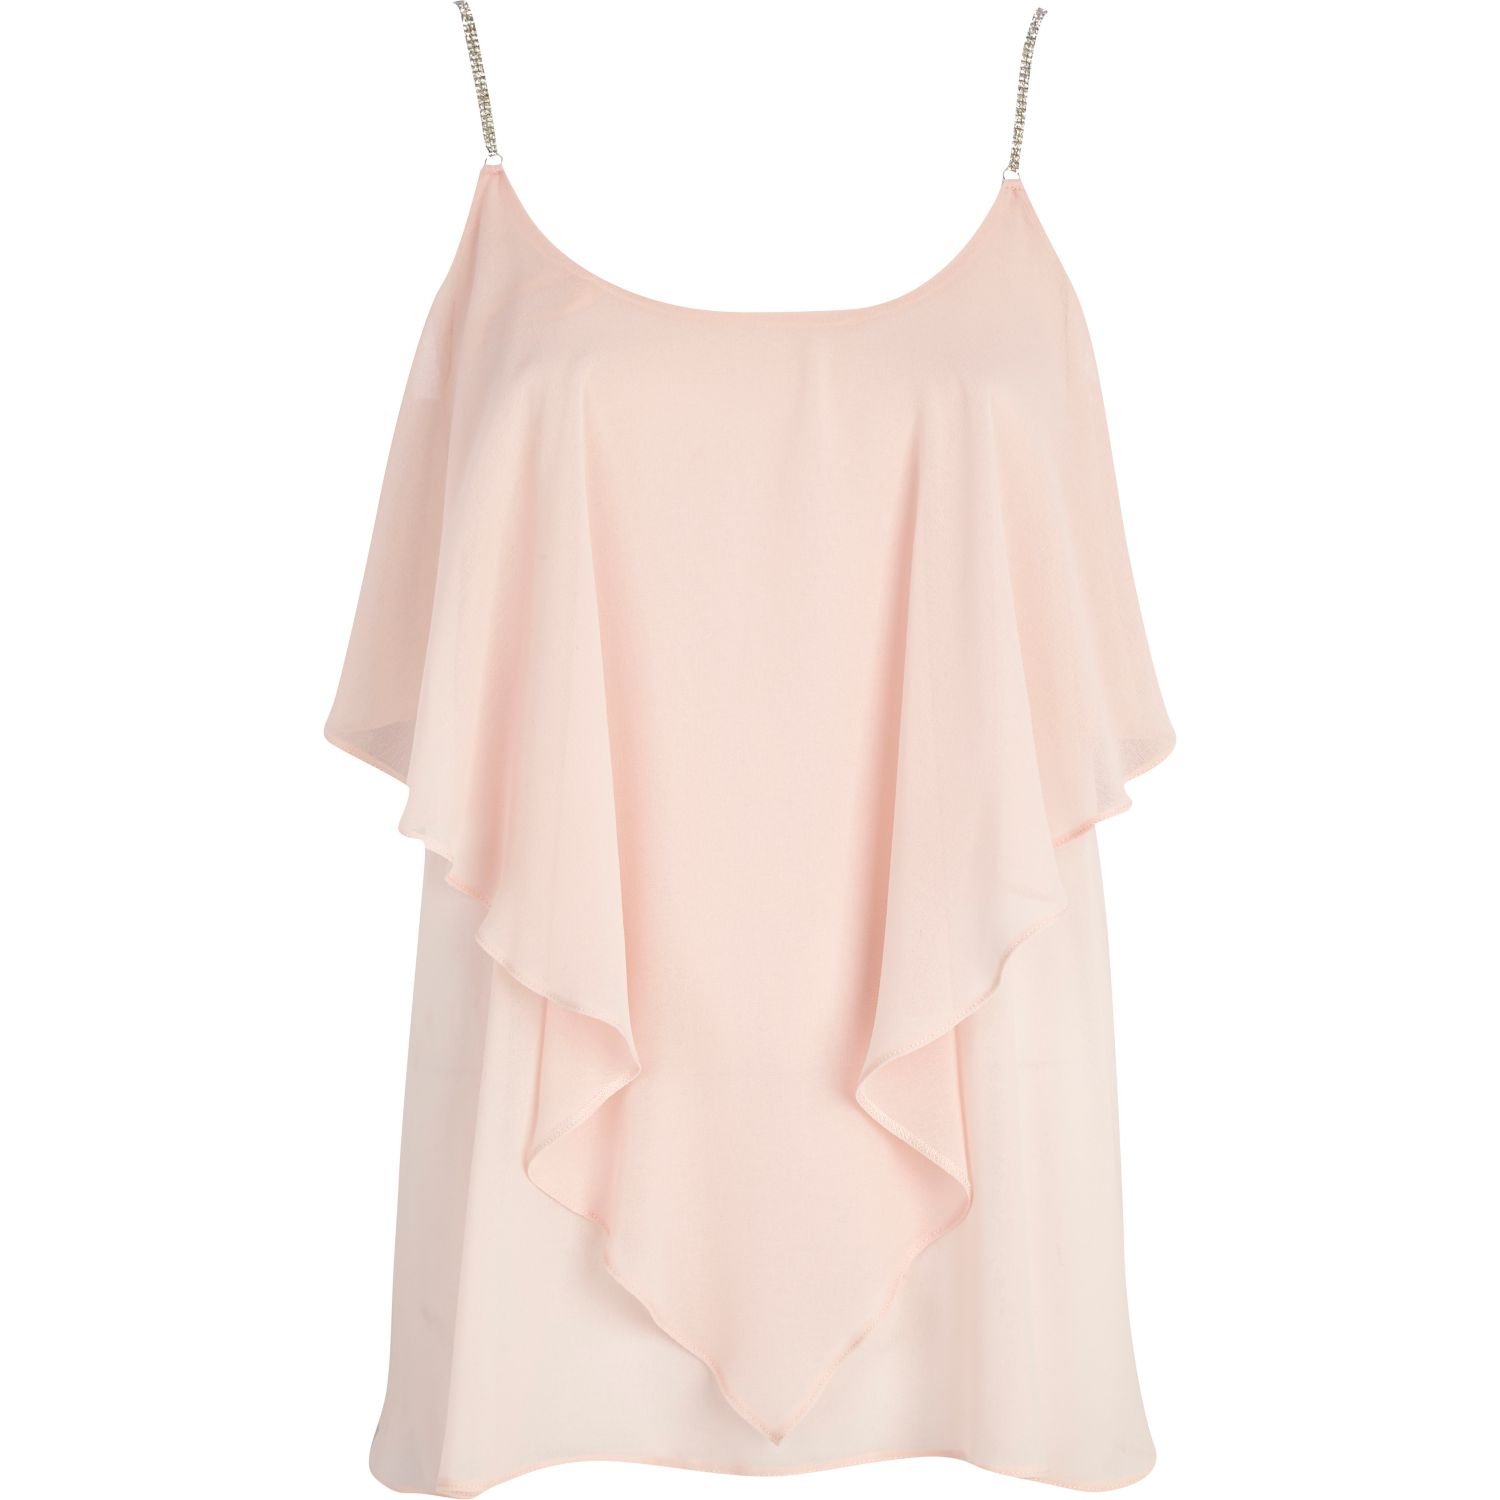 River Island Light Pink Rhinestone Strap Layered Cami Top in Pink | Lyst